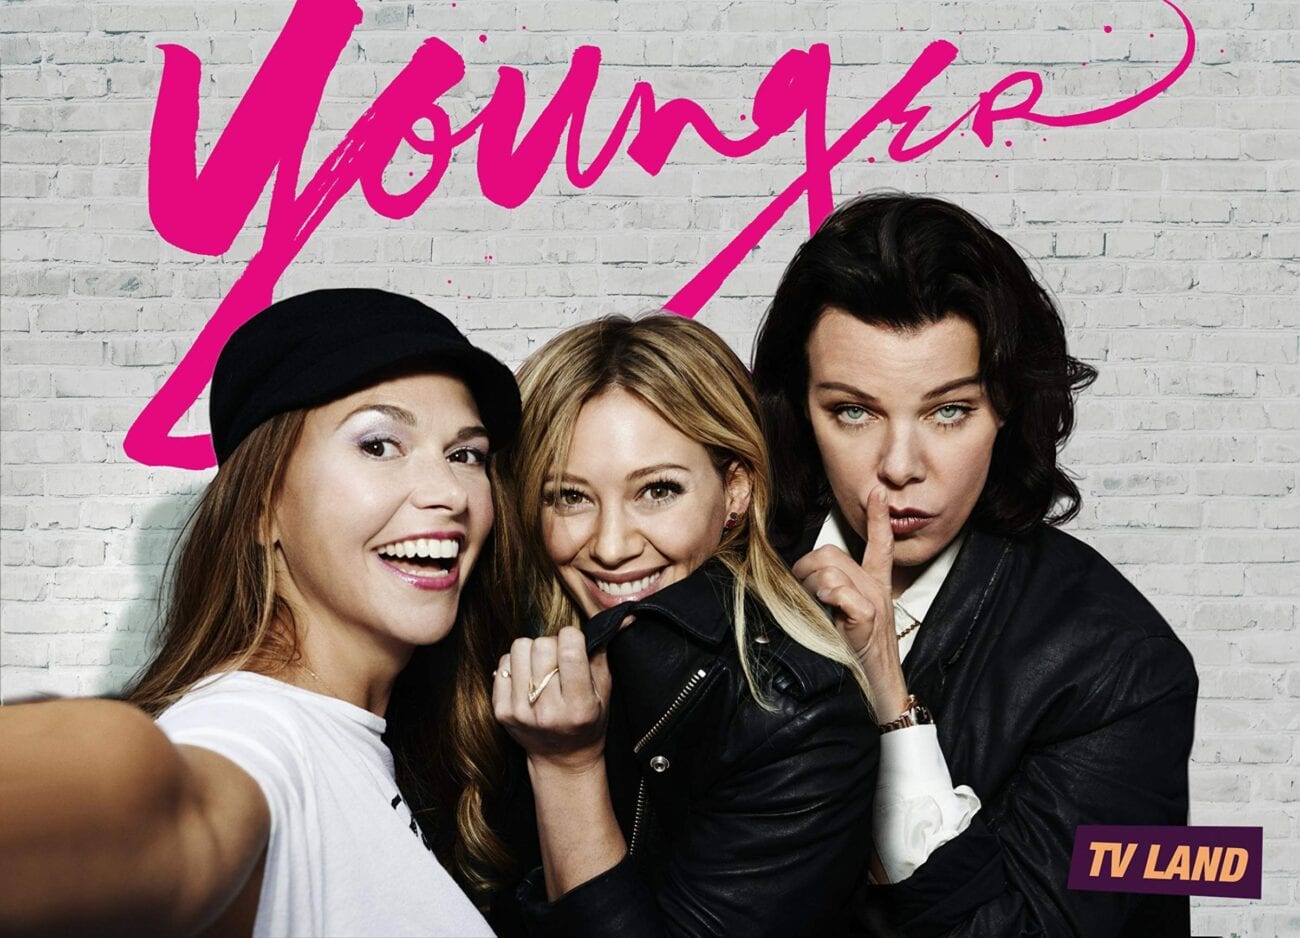 'Younger' creator Darren Star stated that he was “unofficially planning season 7 as a final season”. Here's what you need to know.